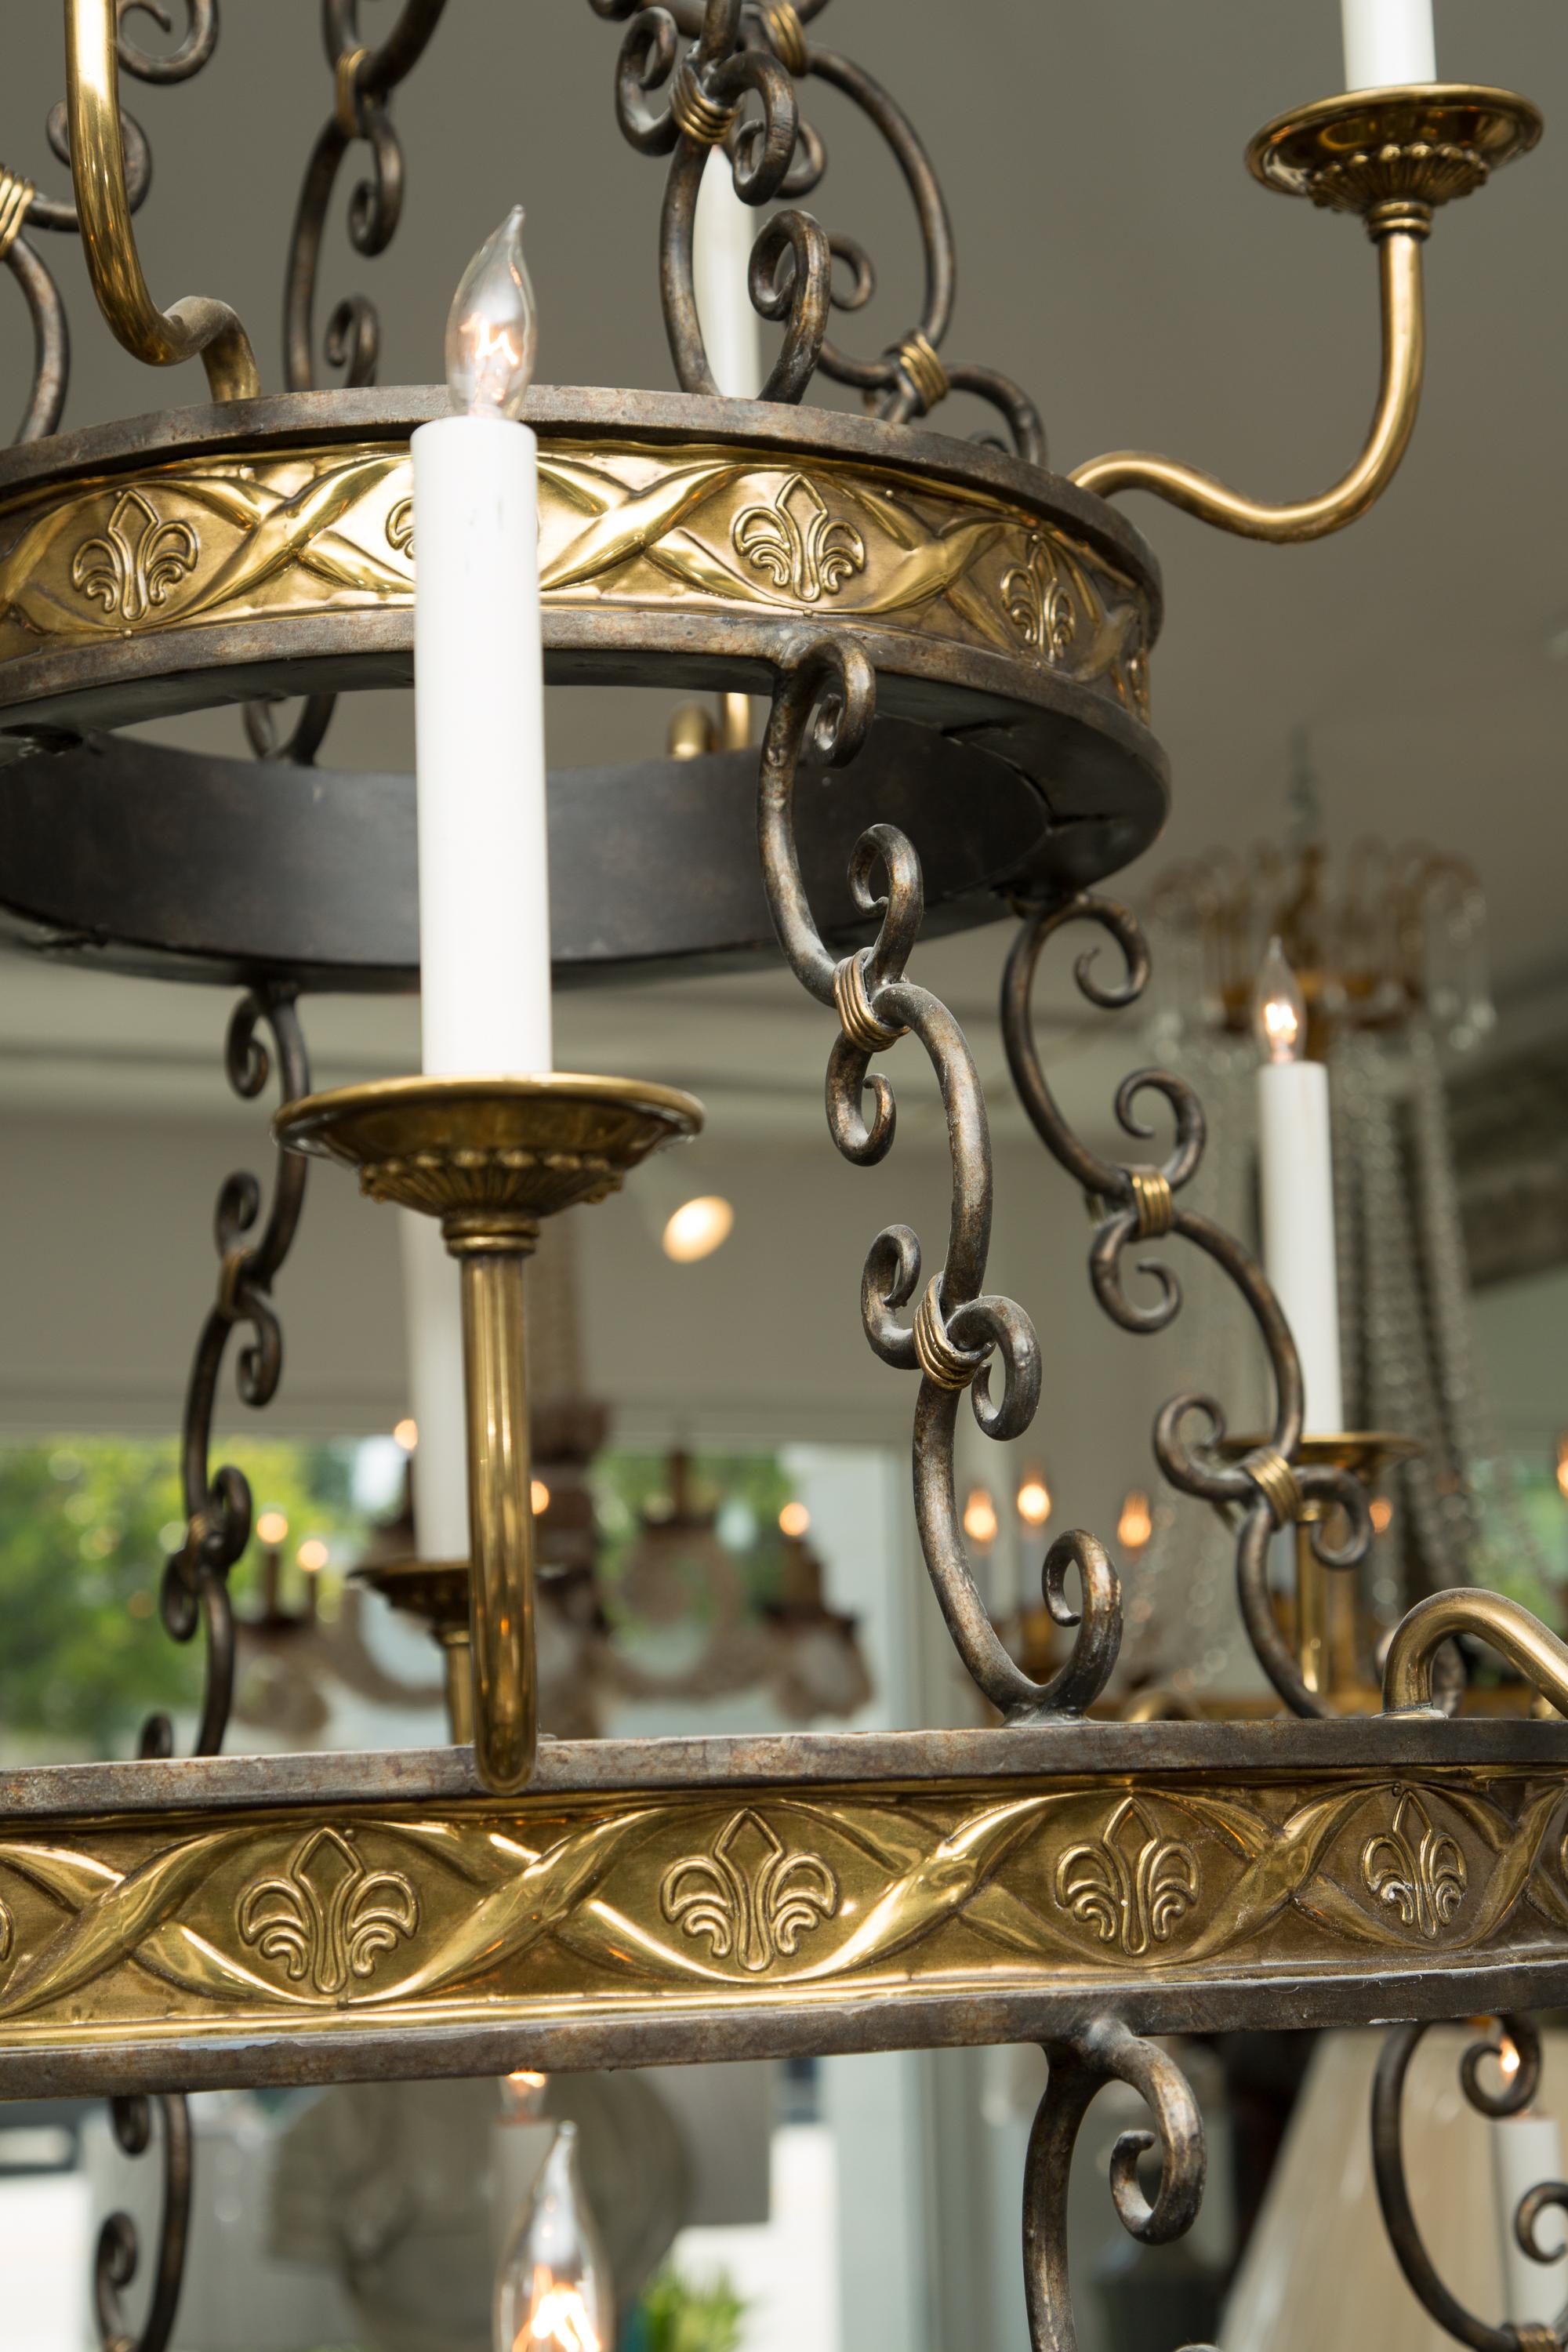 This is a very imposing 20-light iron and brass chandelier in the form of three descending graduated concentric circular frames with emanating candle arms, terminating in a scrolling frame with centralized finials, 20th century.